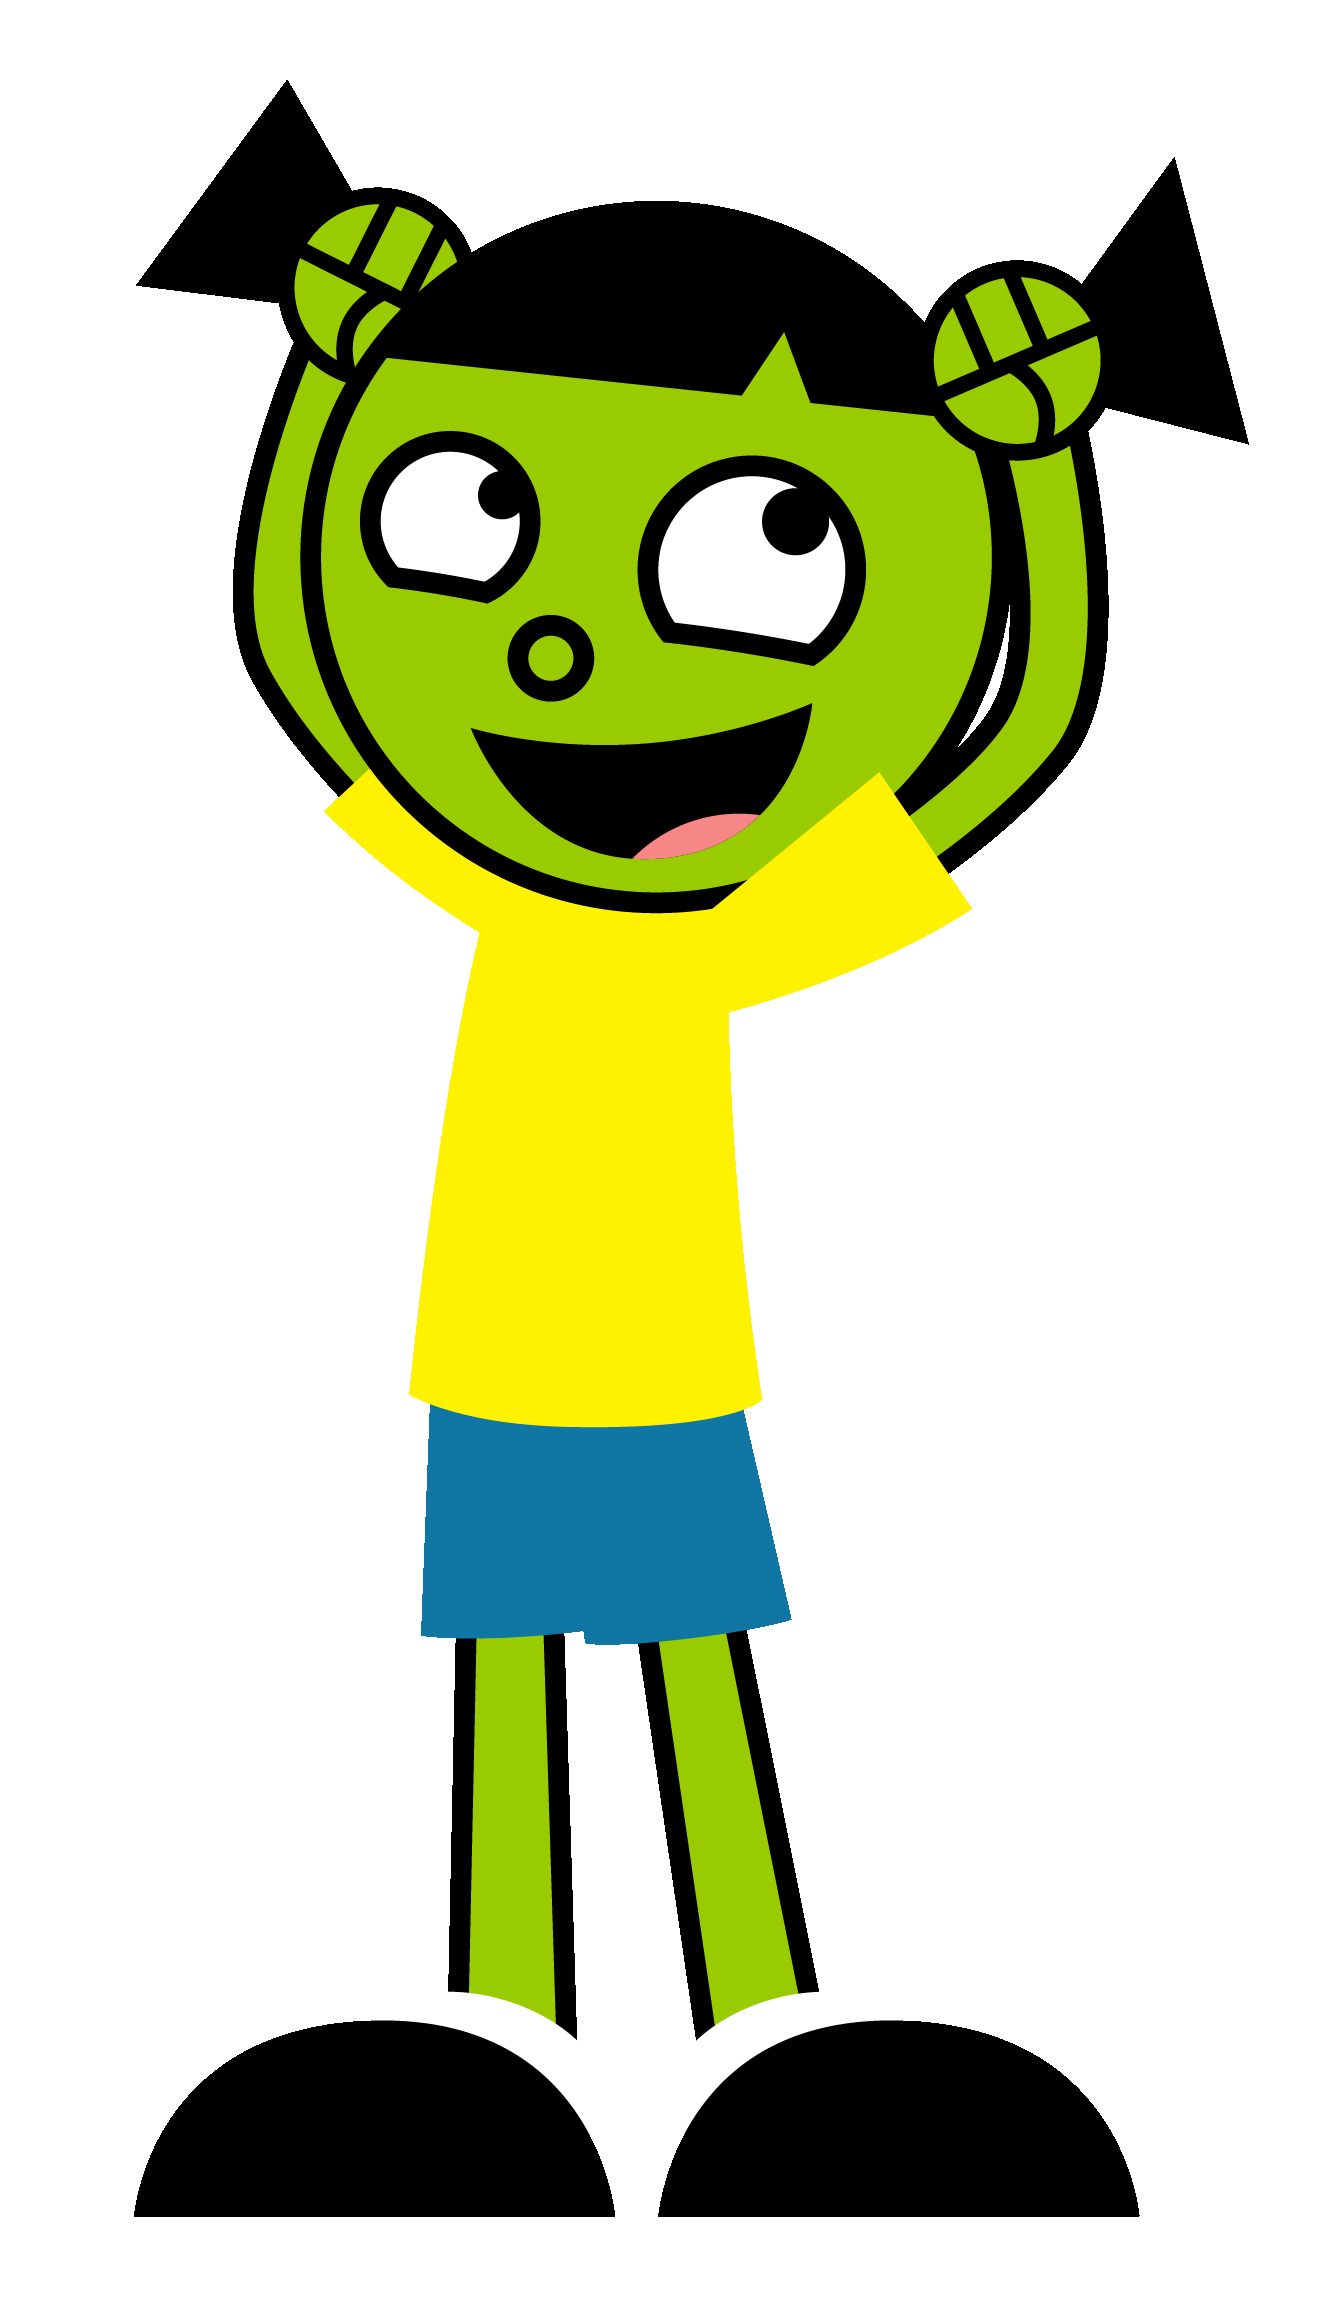 Pbs Kids Gif Jump Roping By Luxoveggiedude9302 On Deviantart Images Images